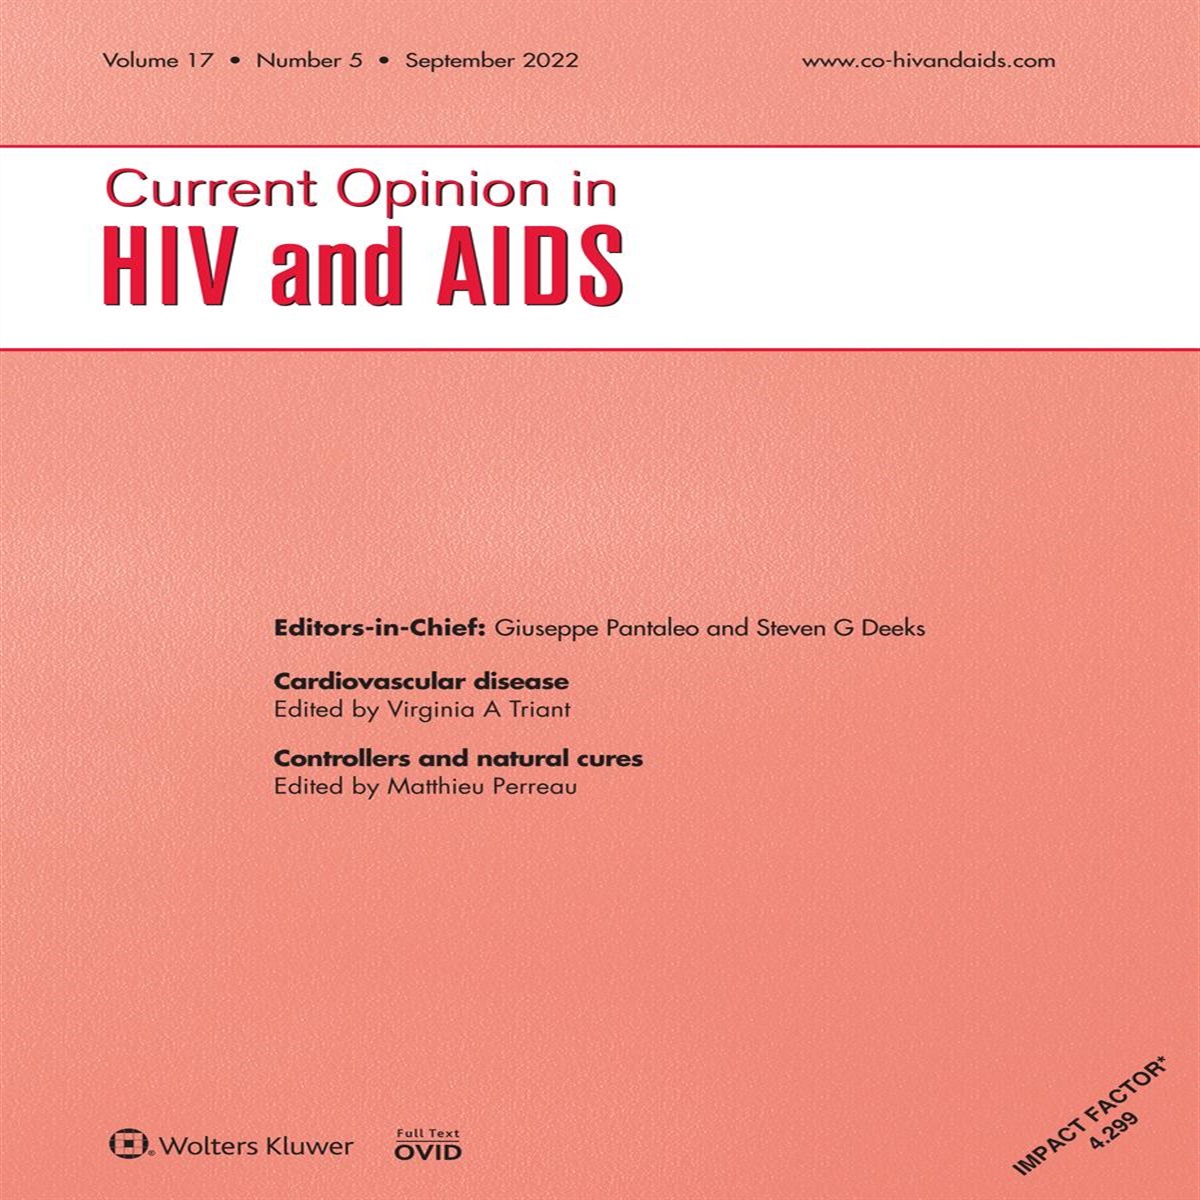 Editorial: HIV and cardiovascular disease: recognizing and reducing disparities